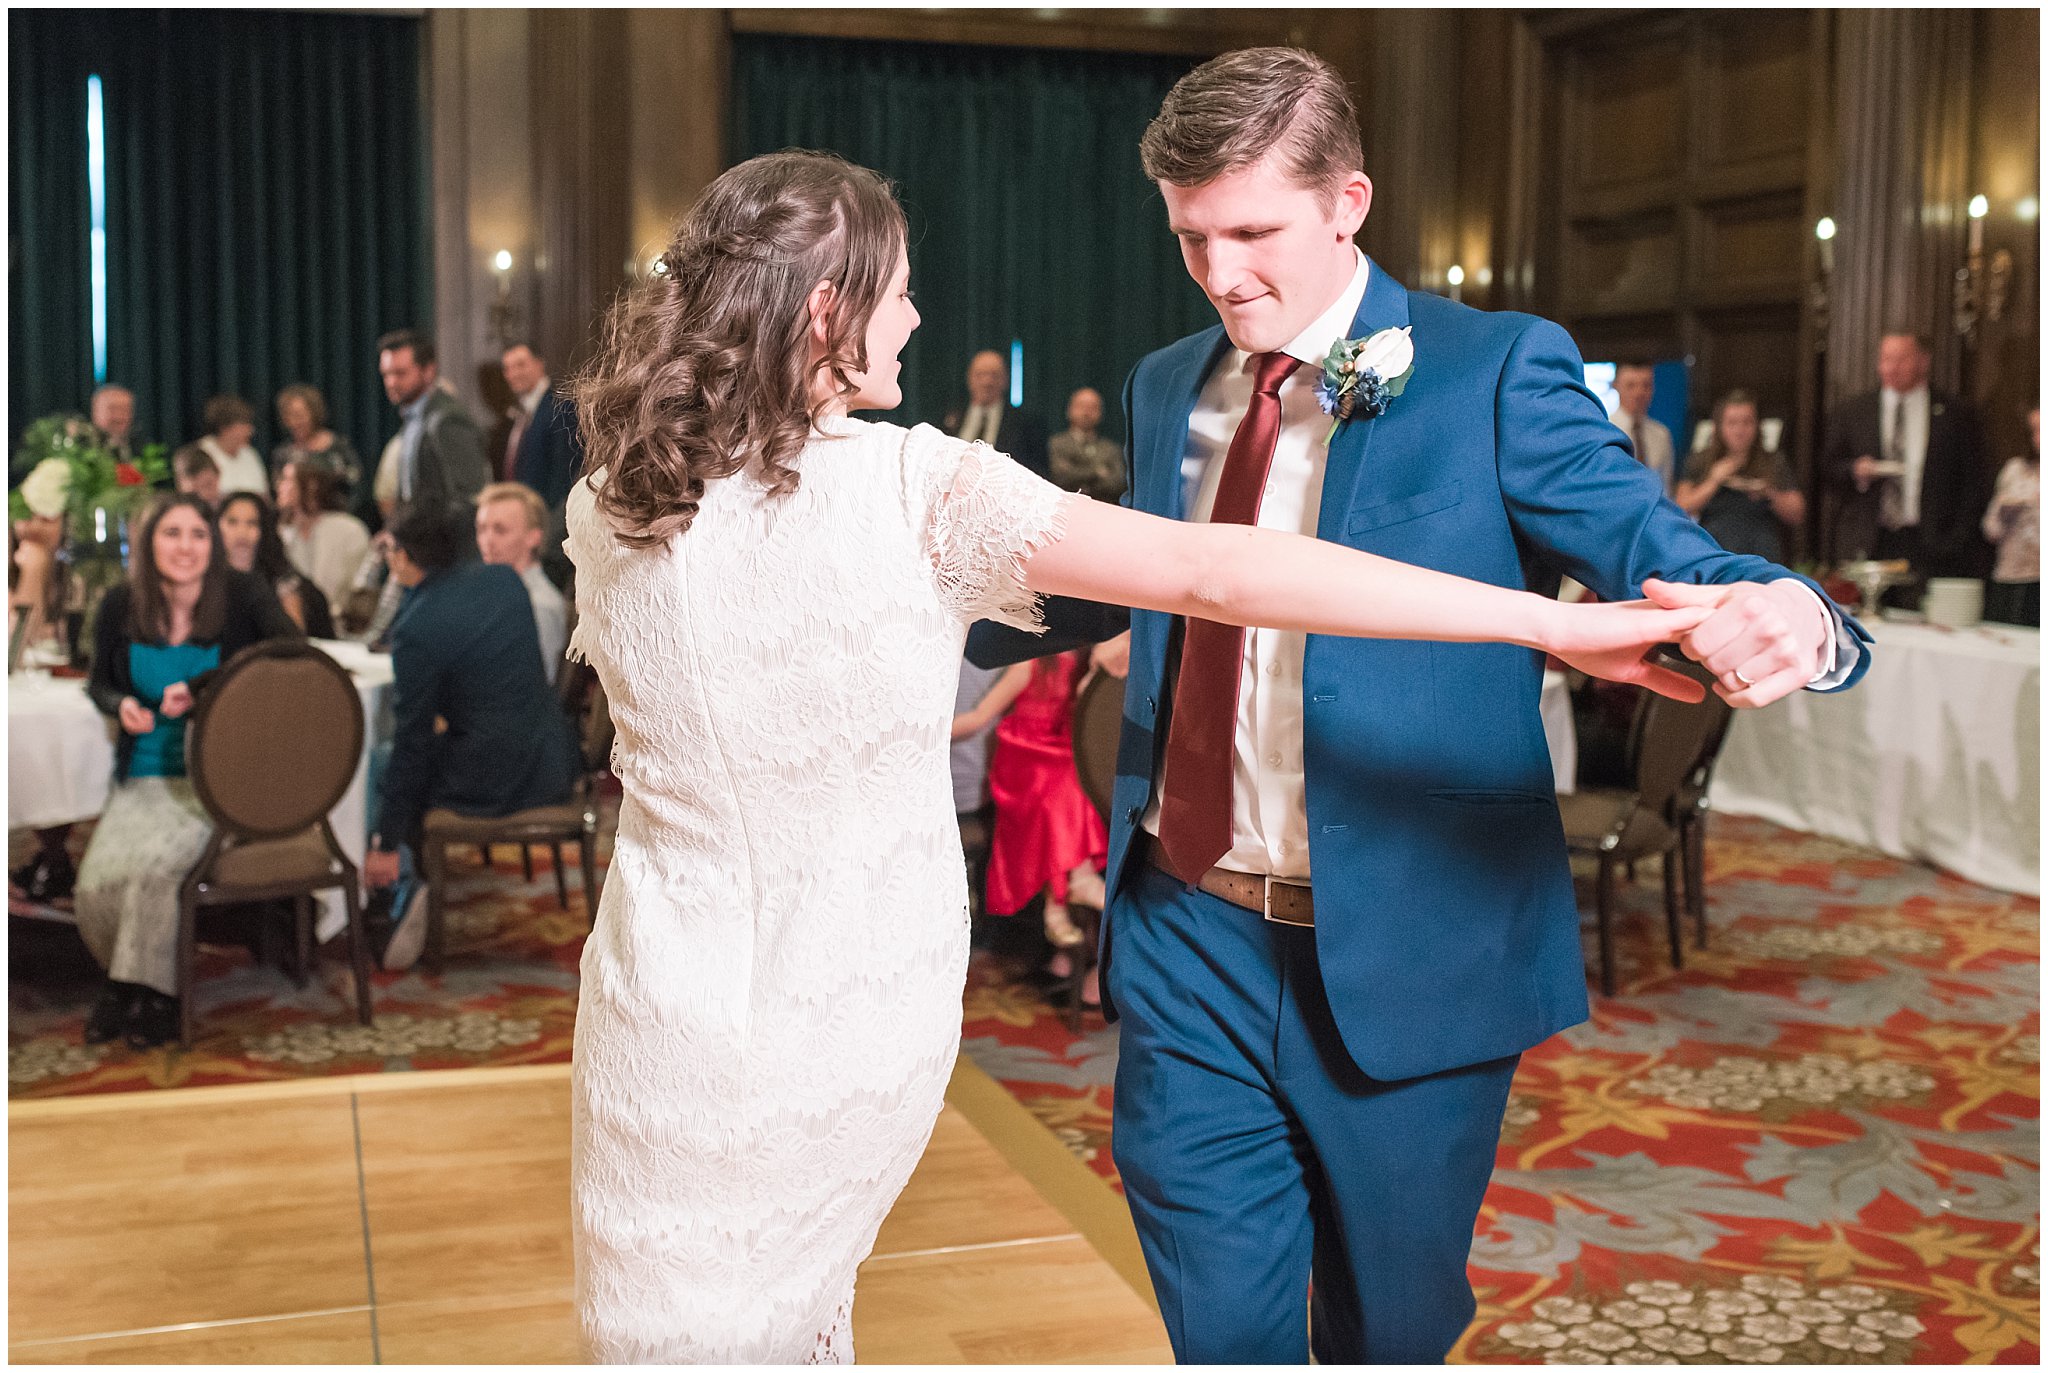 Bride and groom first dance at the Empire Room at Joseph Smith Memorial Building | navy and burgundy colors | Bountiful Temple Wedding and Joseph Smith Memorial Reception | Jessie and Dallin Photography